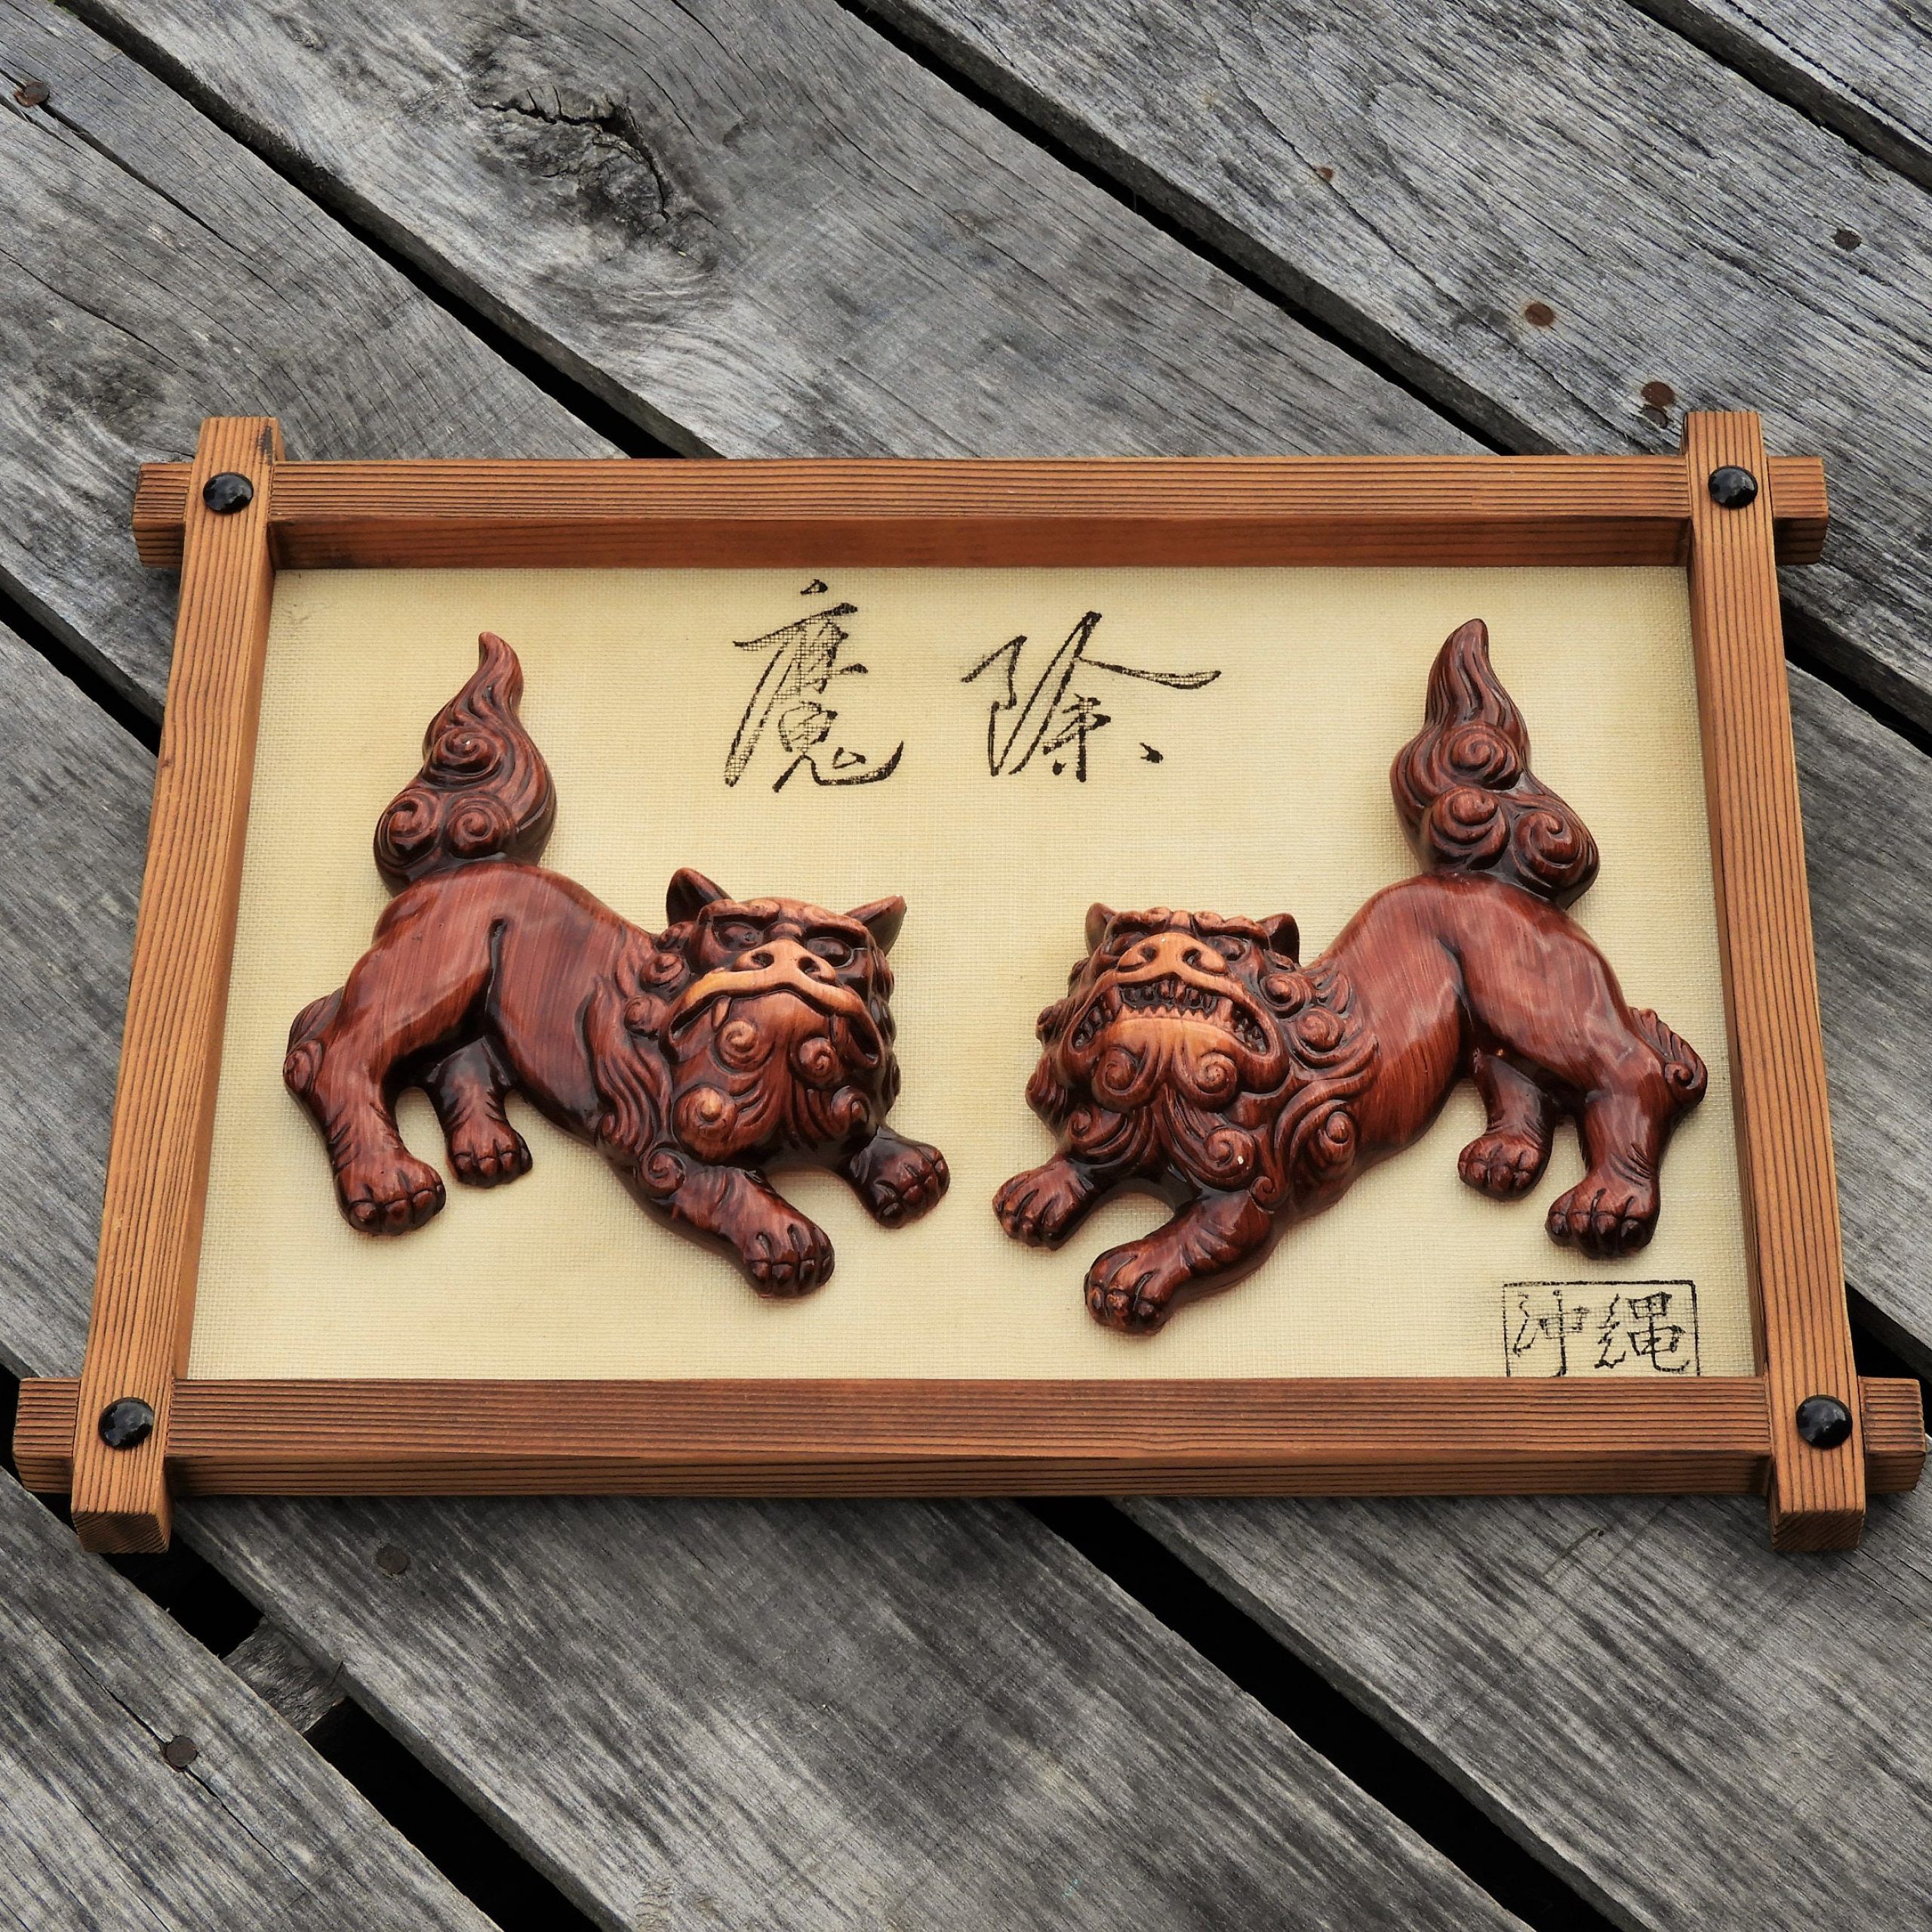 Vintage Foo Dog Decor, Wall Hanging, Chinese Dogs, Burgundy & Brown Throughout Recent Dog Wall Art (View 7 of 20)